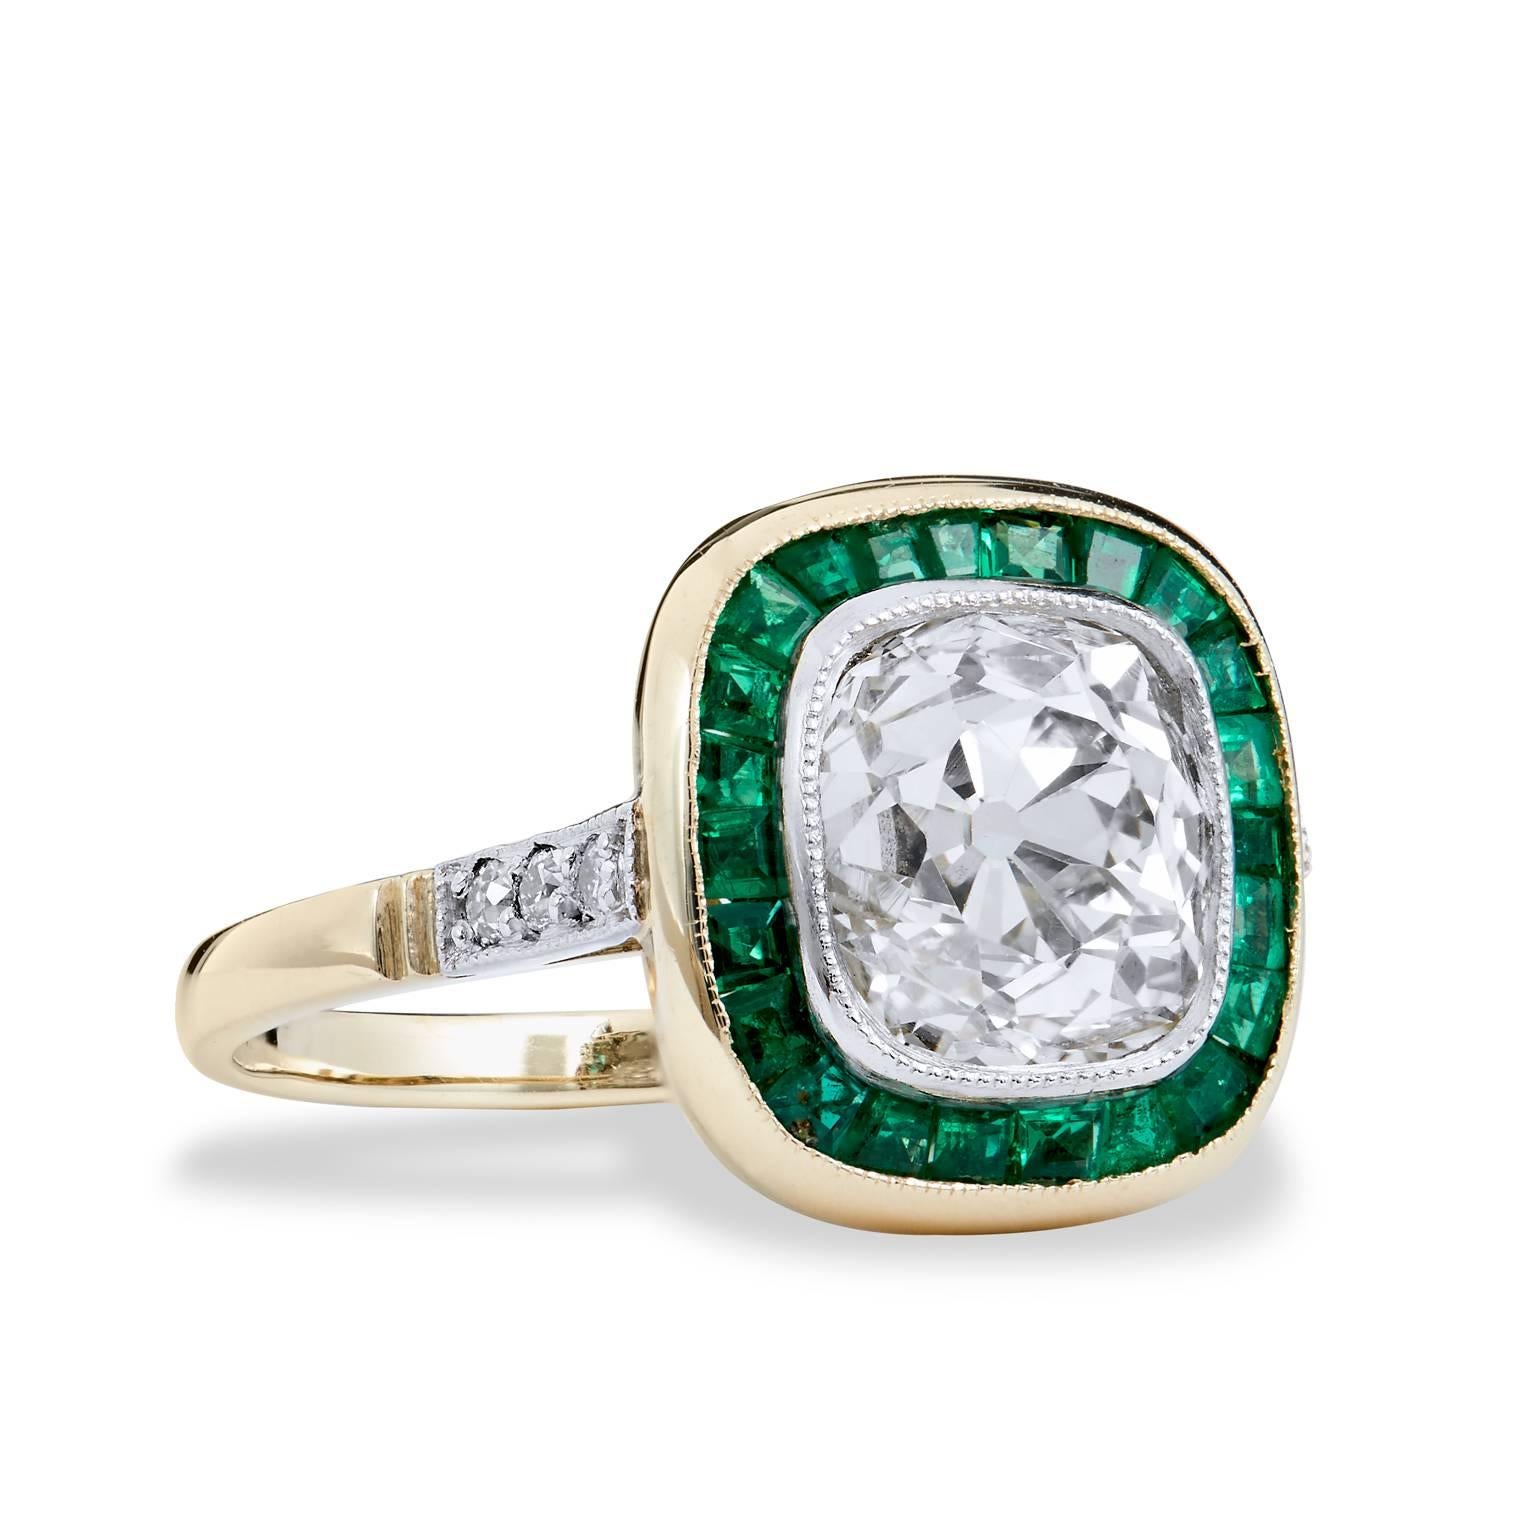 Suited for an engagement ring or a special occasion piece, this ring is a beautifully simple look with a special twist of design. The contrast of emeralds and diamonds creates a sensational color combination with an impressive 2.49ct O/P VS2 Old